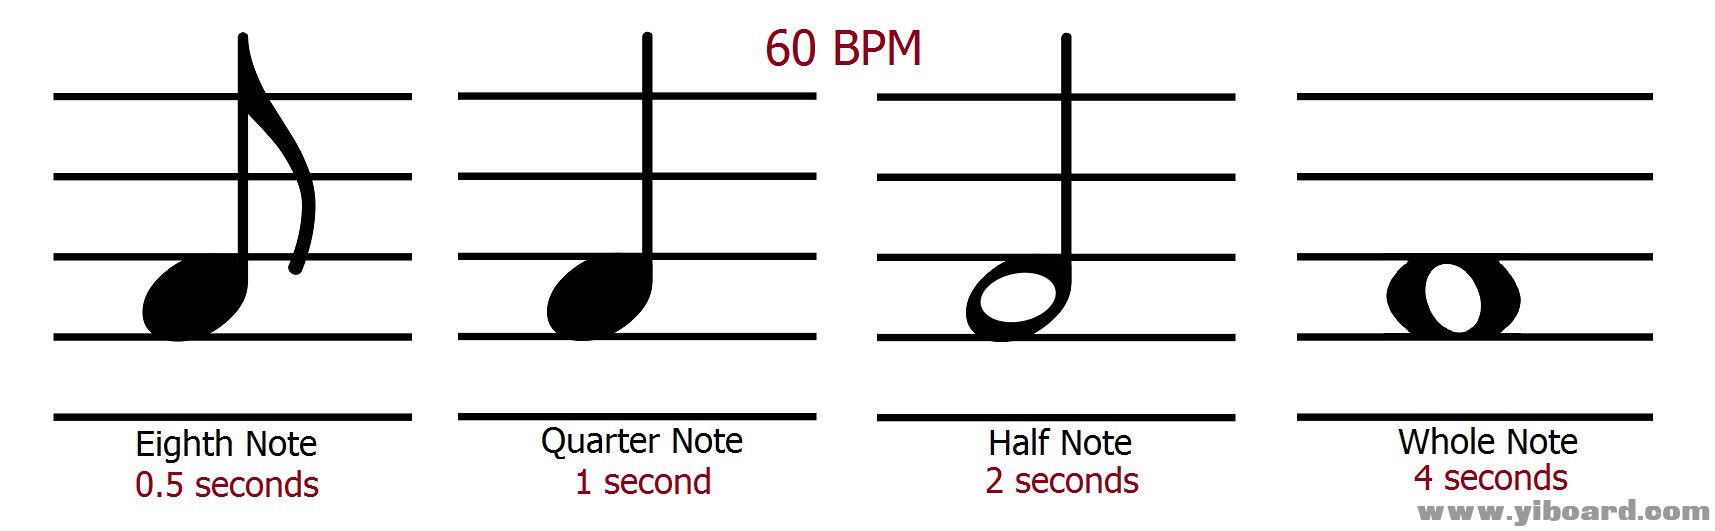 musical_notes_duration.jpg